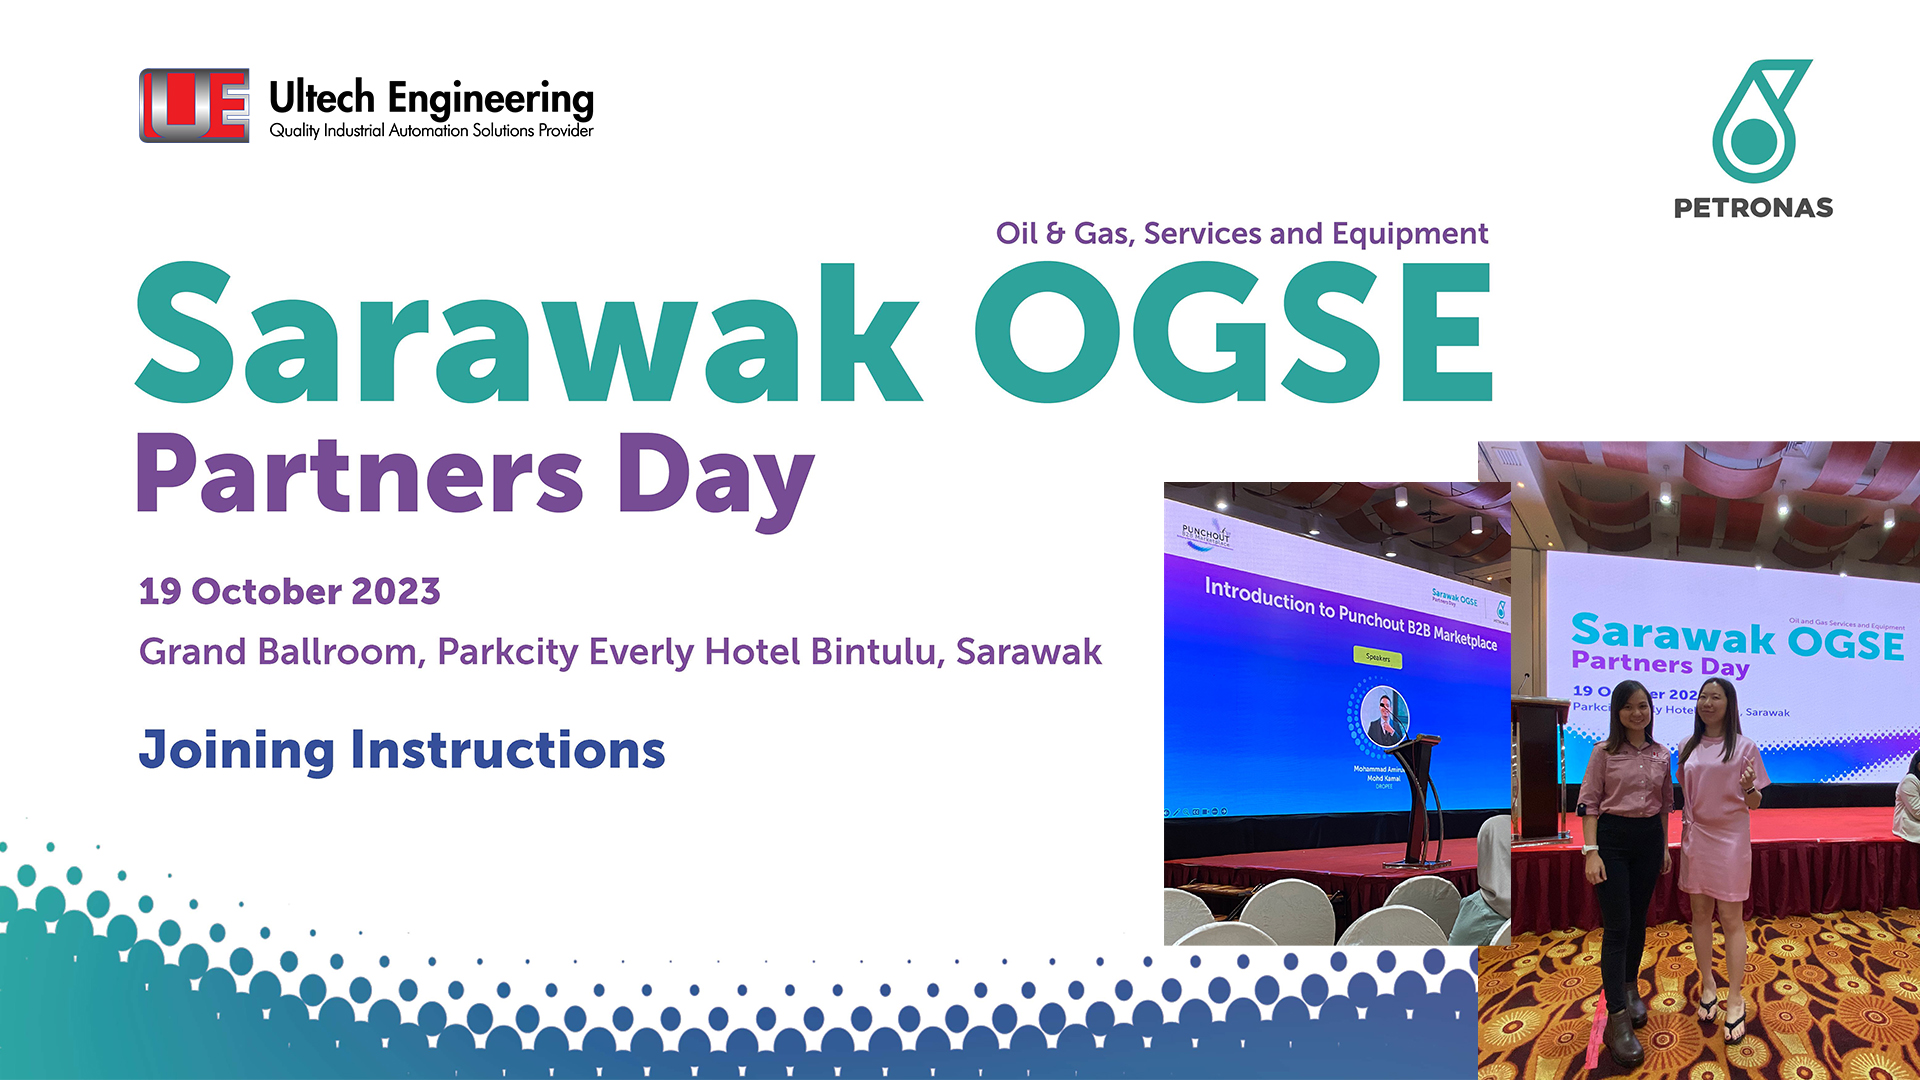 Ultech Engineering Reports: 5 Game-Changing Innovations Unveiled at Petronas Sarawak OGSE Partners Day 2023